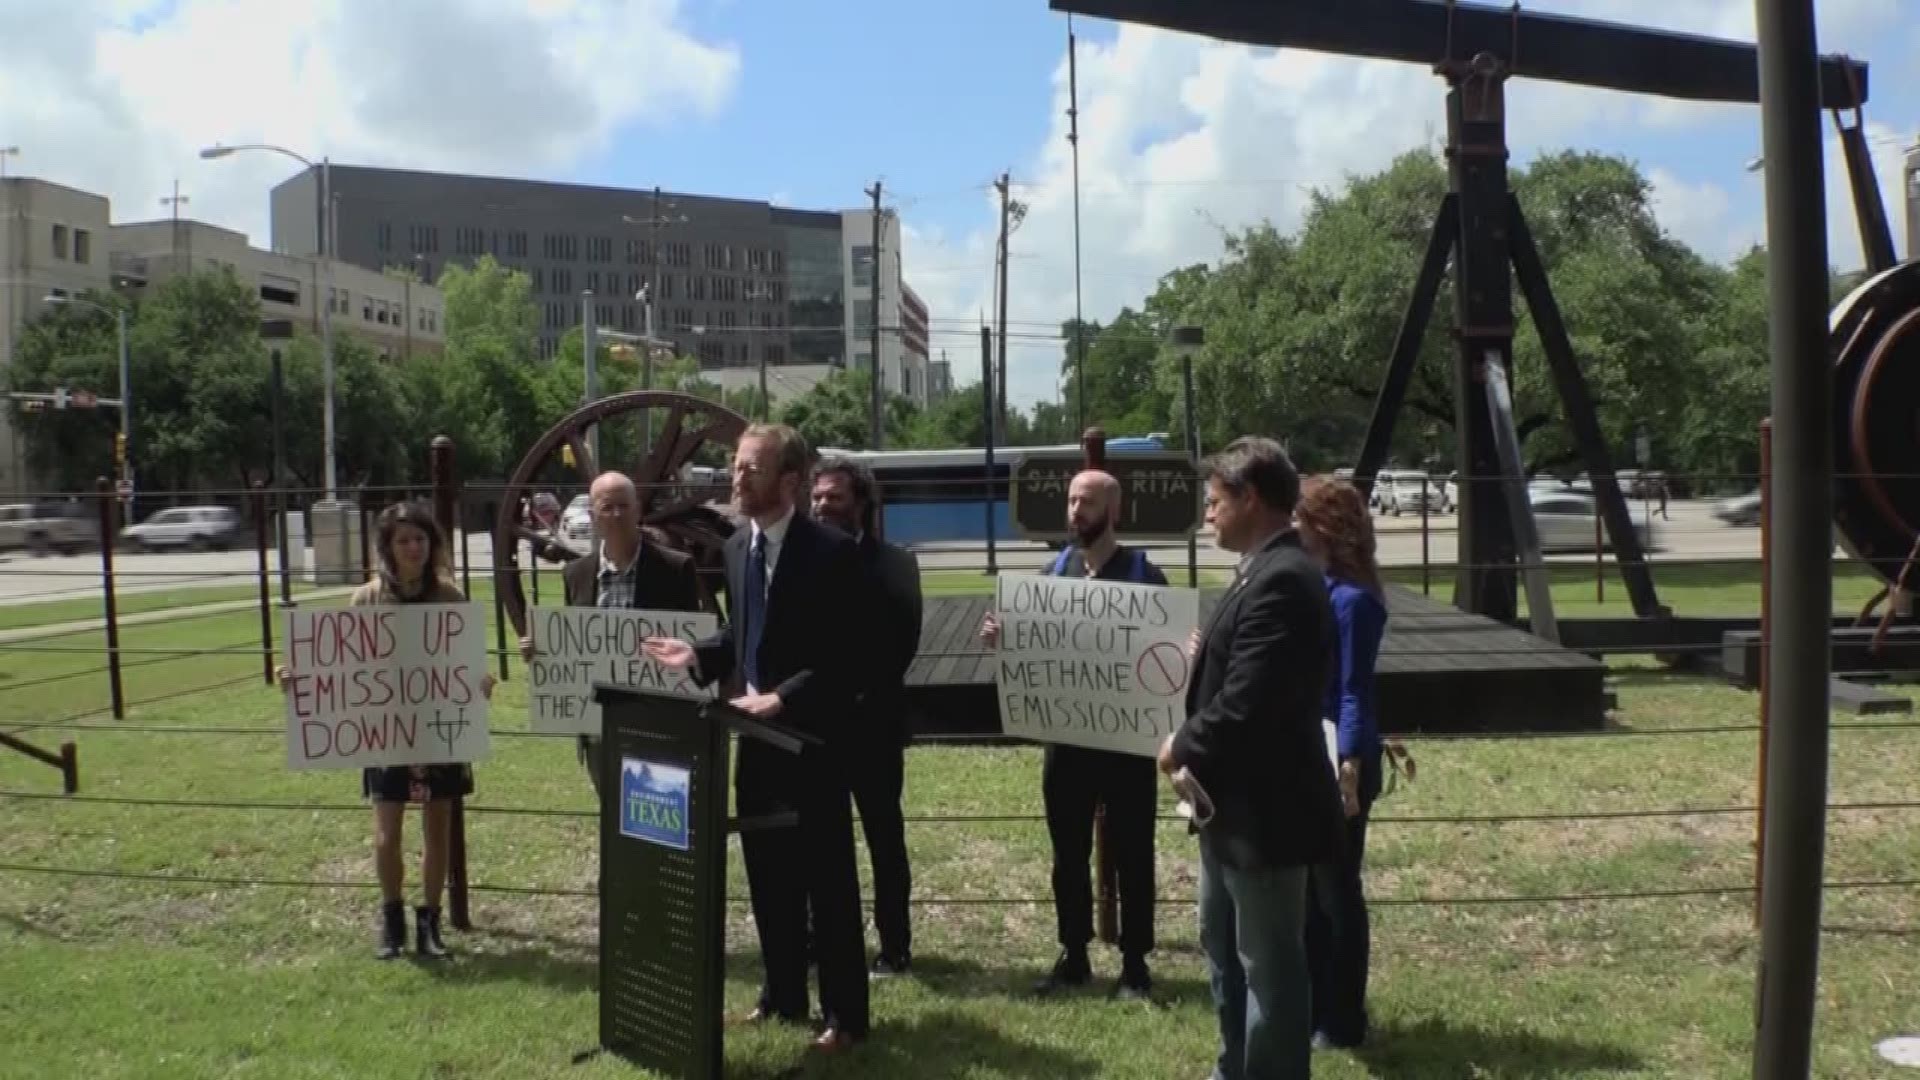 There's growing concern over the amount of methane released from oil and gas facilities operating on University of Texas owned land.